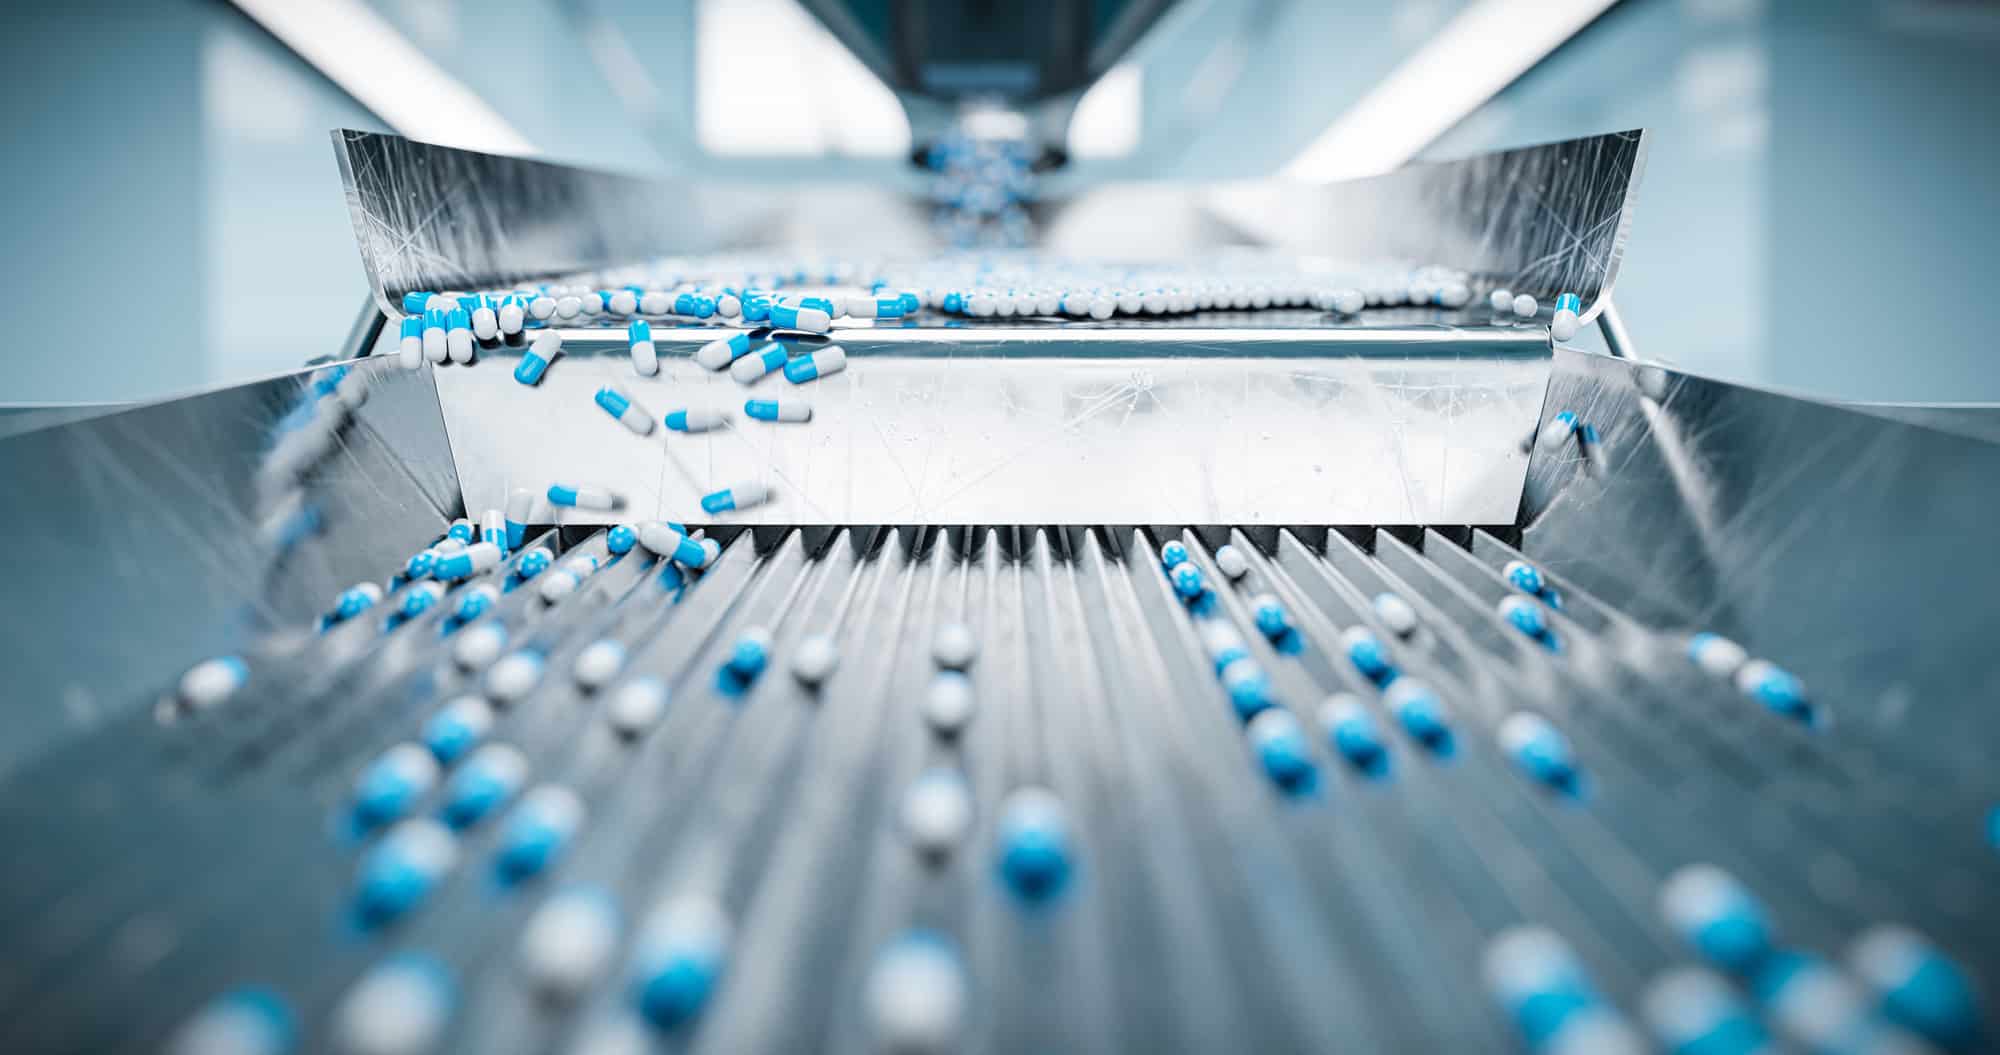 Blue and white capsules in pharmaceutical operations on a conveyor belt in a manufacturing facility.